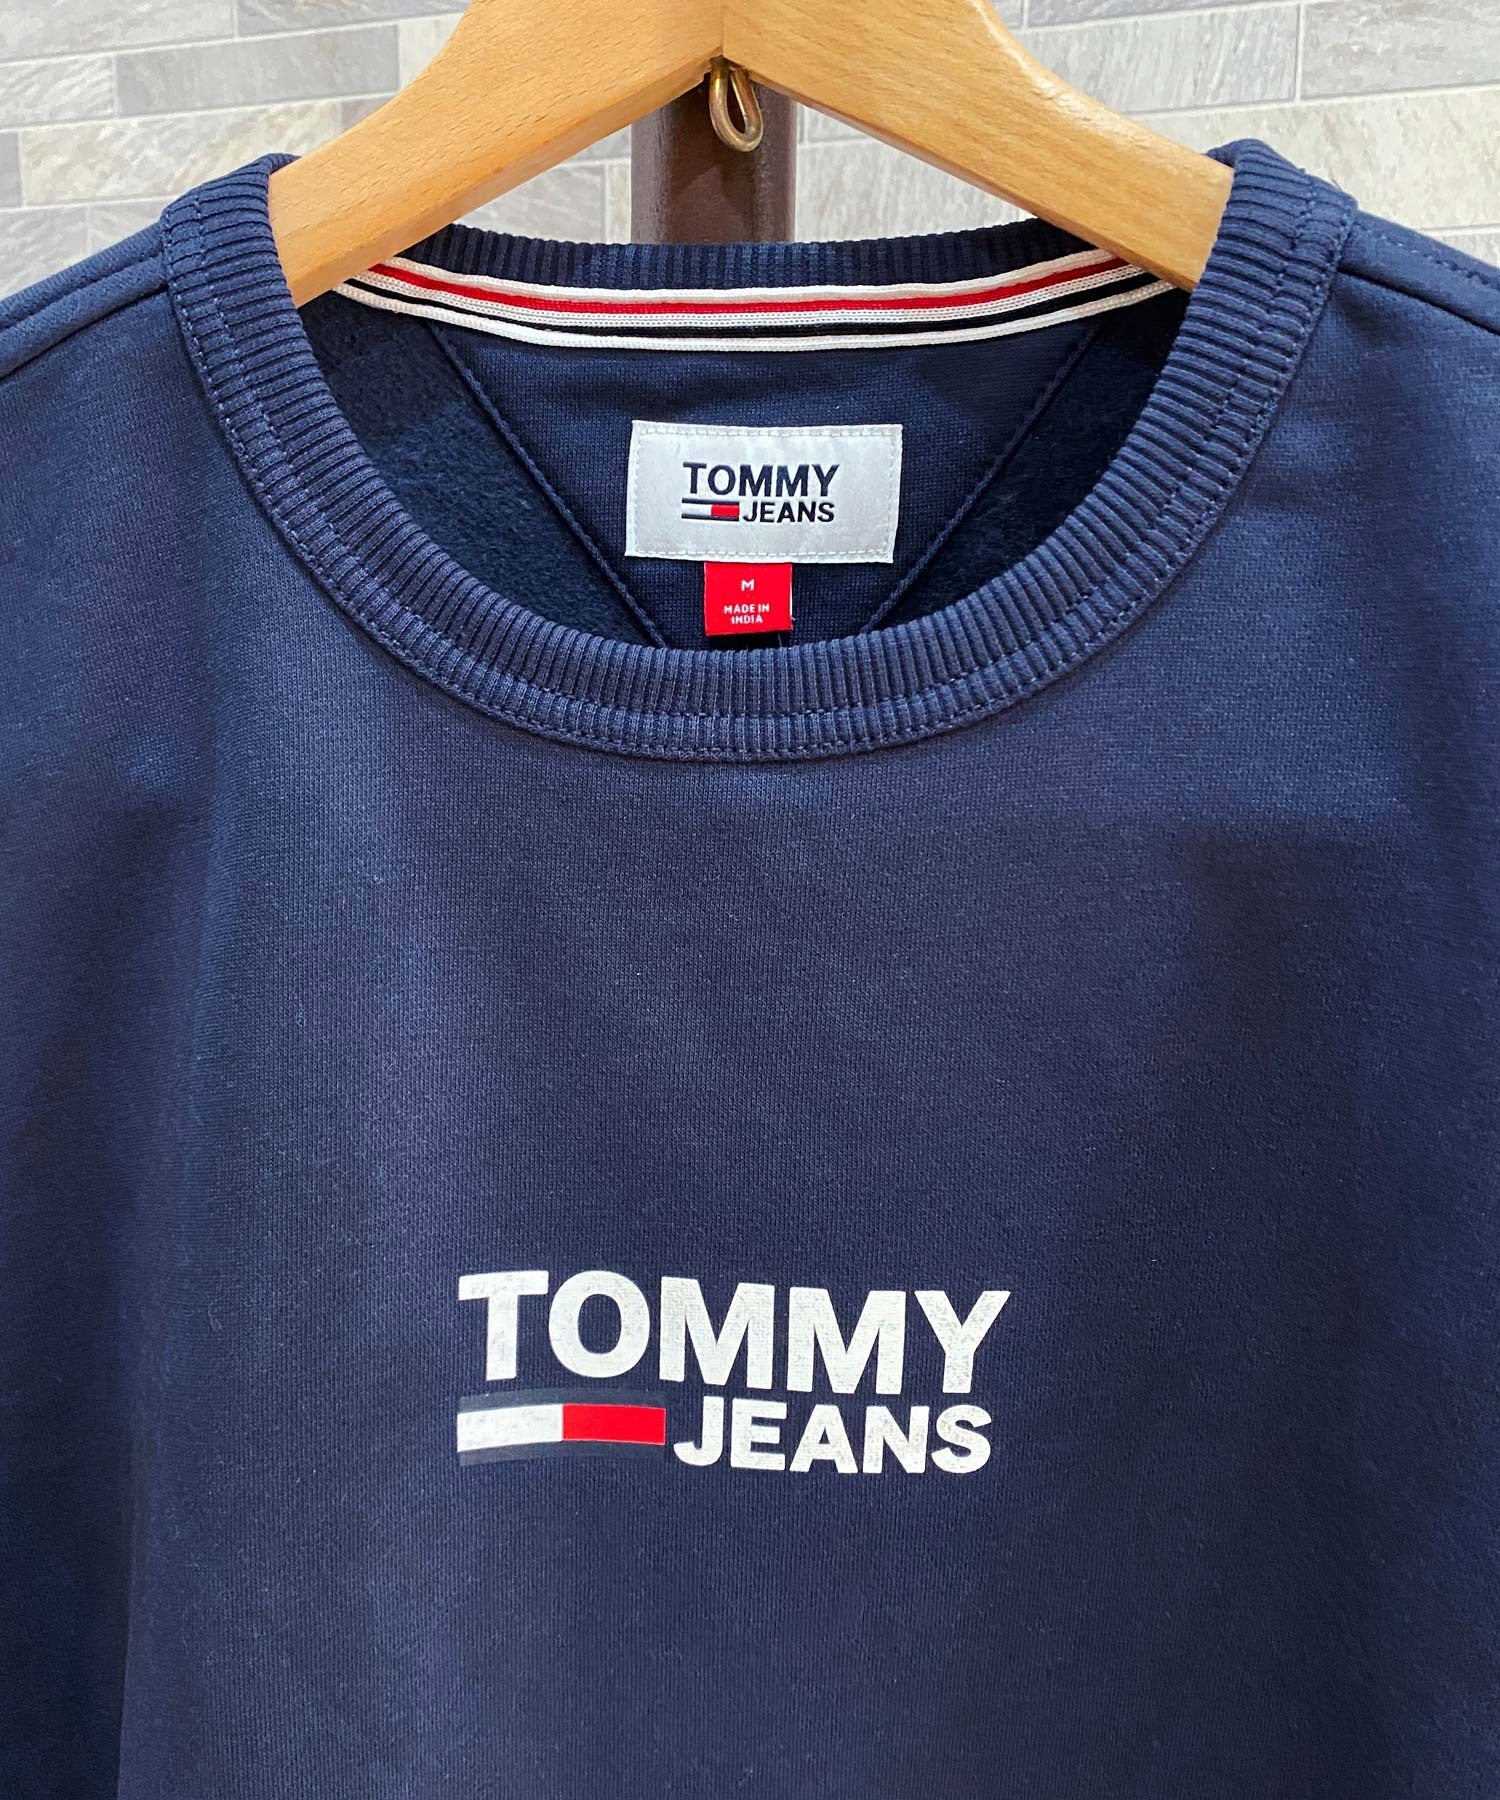 TOMMY HILFIGER トミー ヒルフィガー TOMMY JEANS ロゴ スウェット